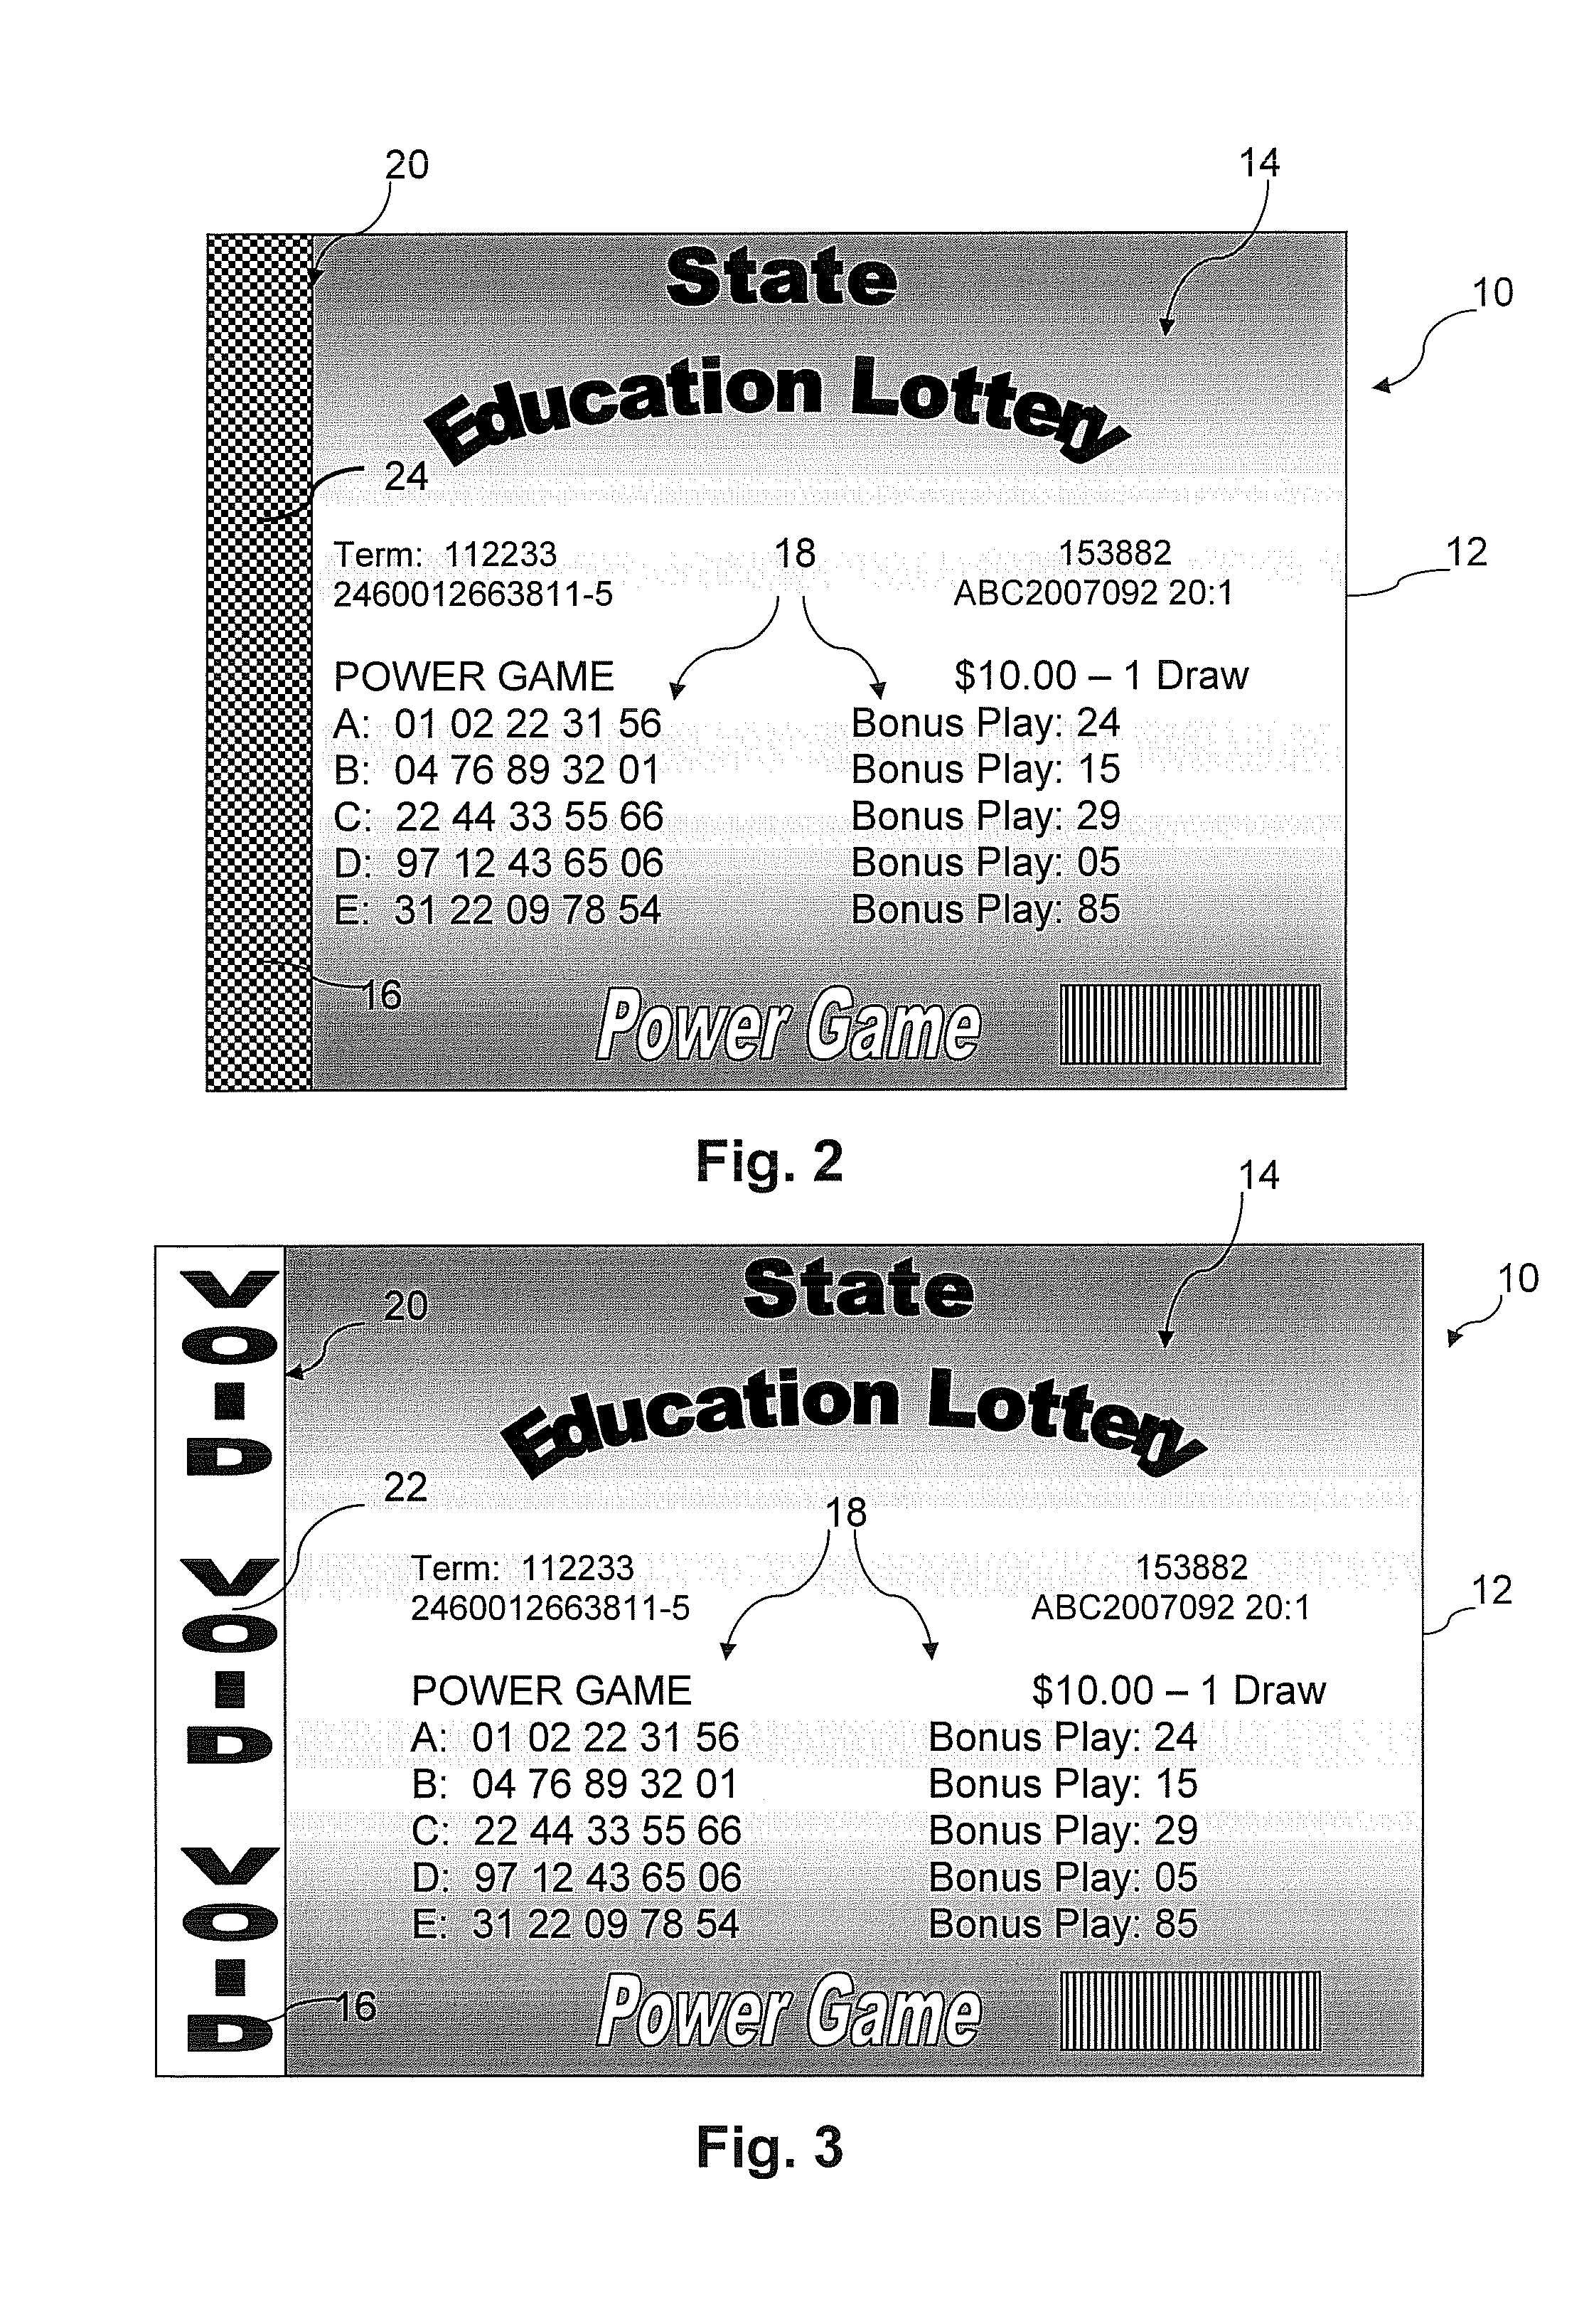 Method and System for Terminal Dispensed Lottery Ticket with Validation Mark